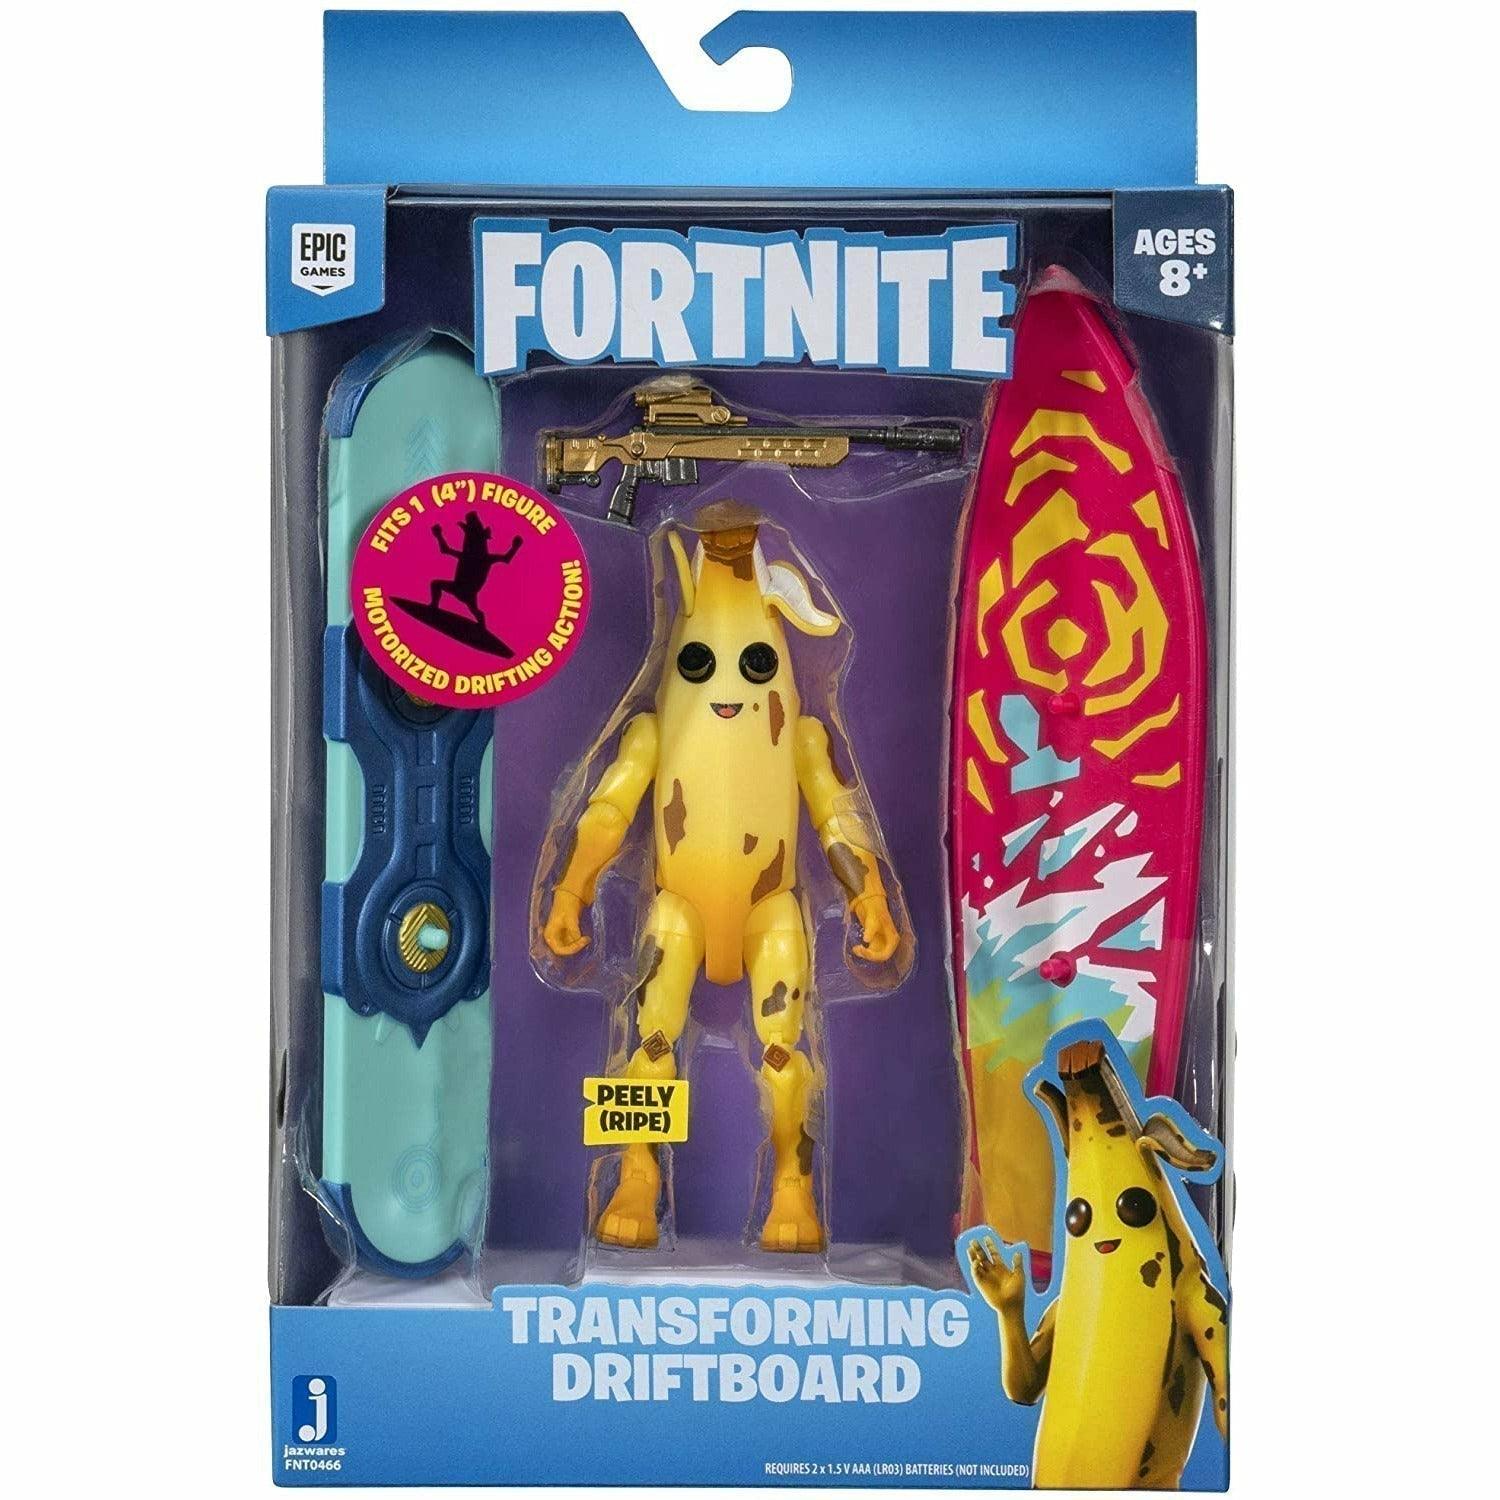 Fortnite Transforming Driftboard Vehicle - Interchangeable Surfboard and Driftboard Faceplates - BumbleToys - 8+ Years, 8-13 Years, Action Battling, Action Figures, Boys, Figures, Fortnite, OXE, Pre-Order